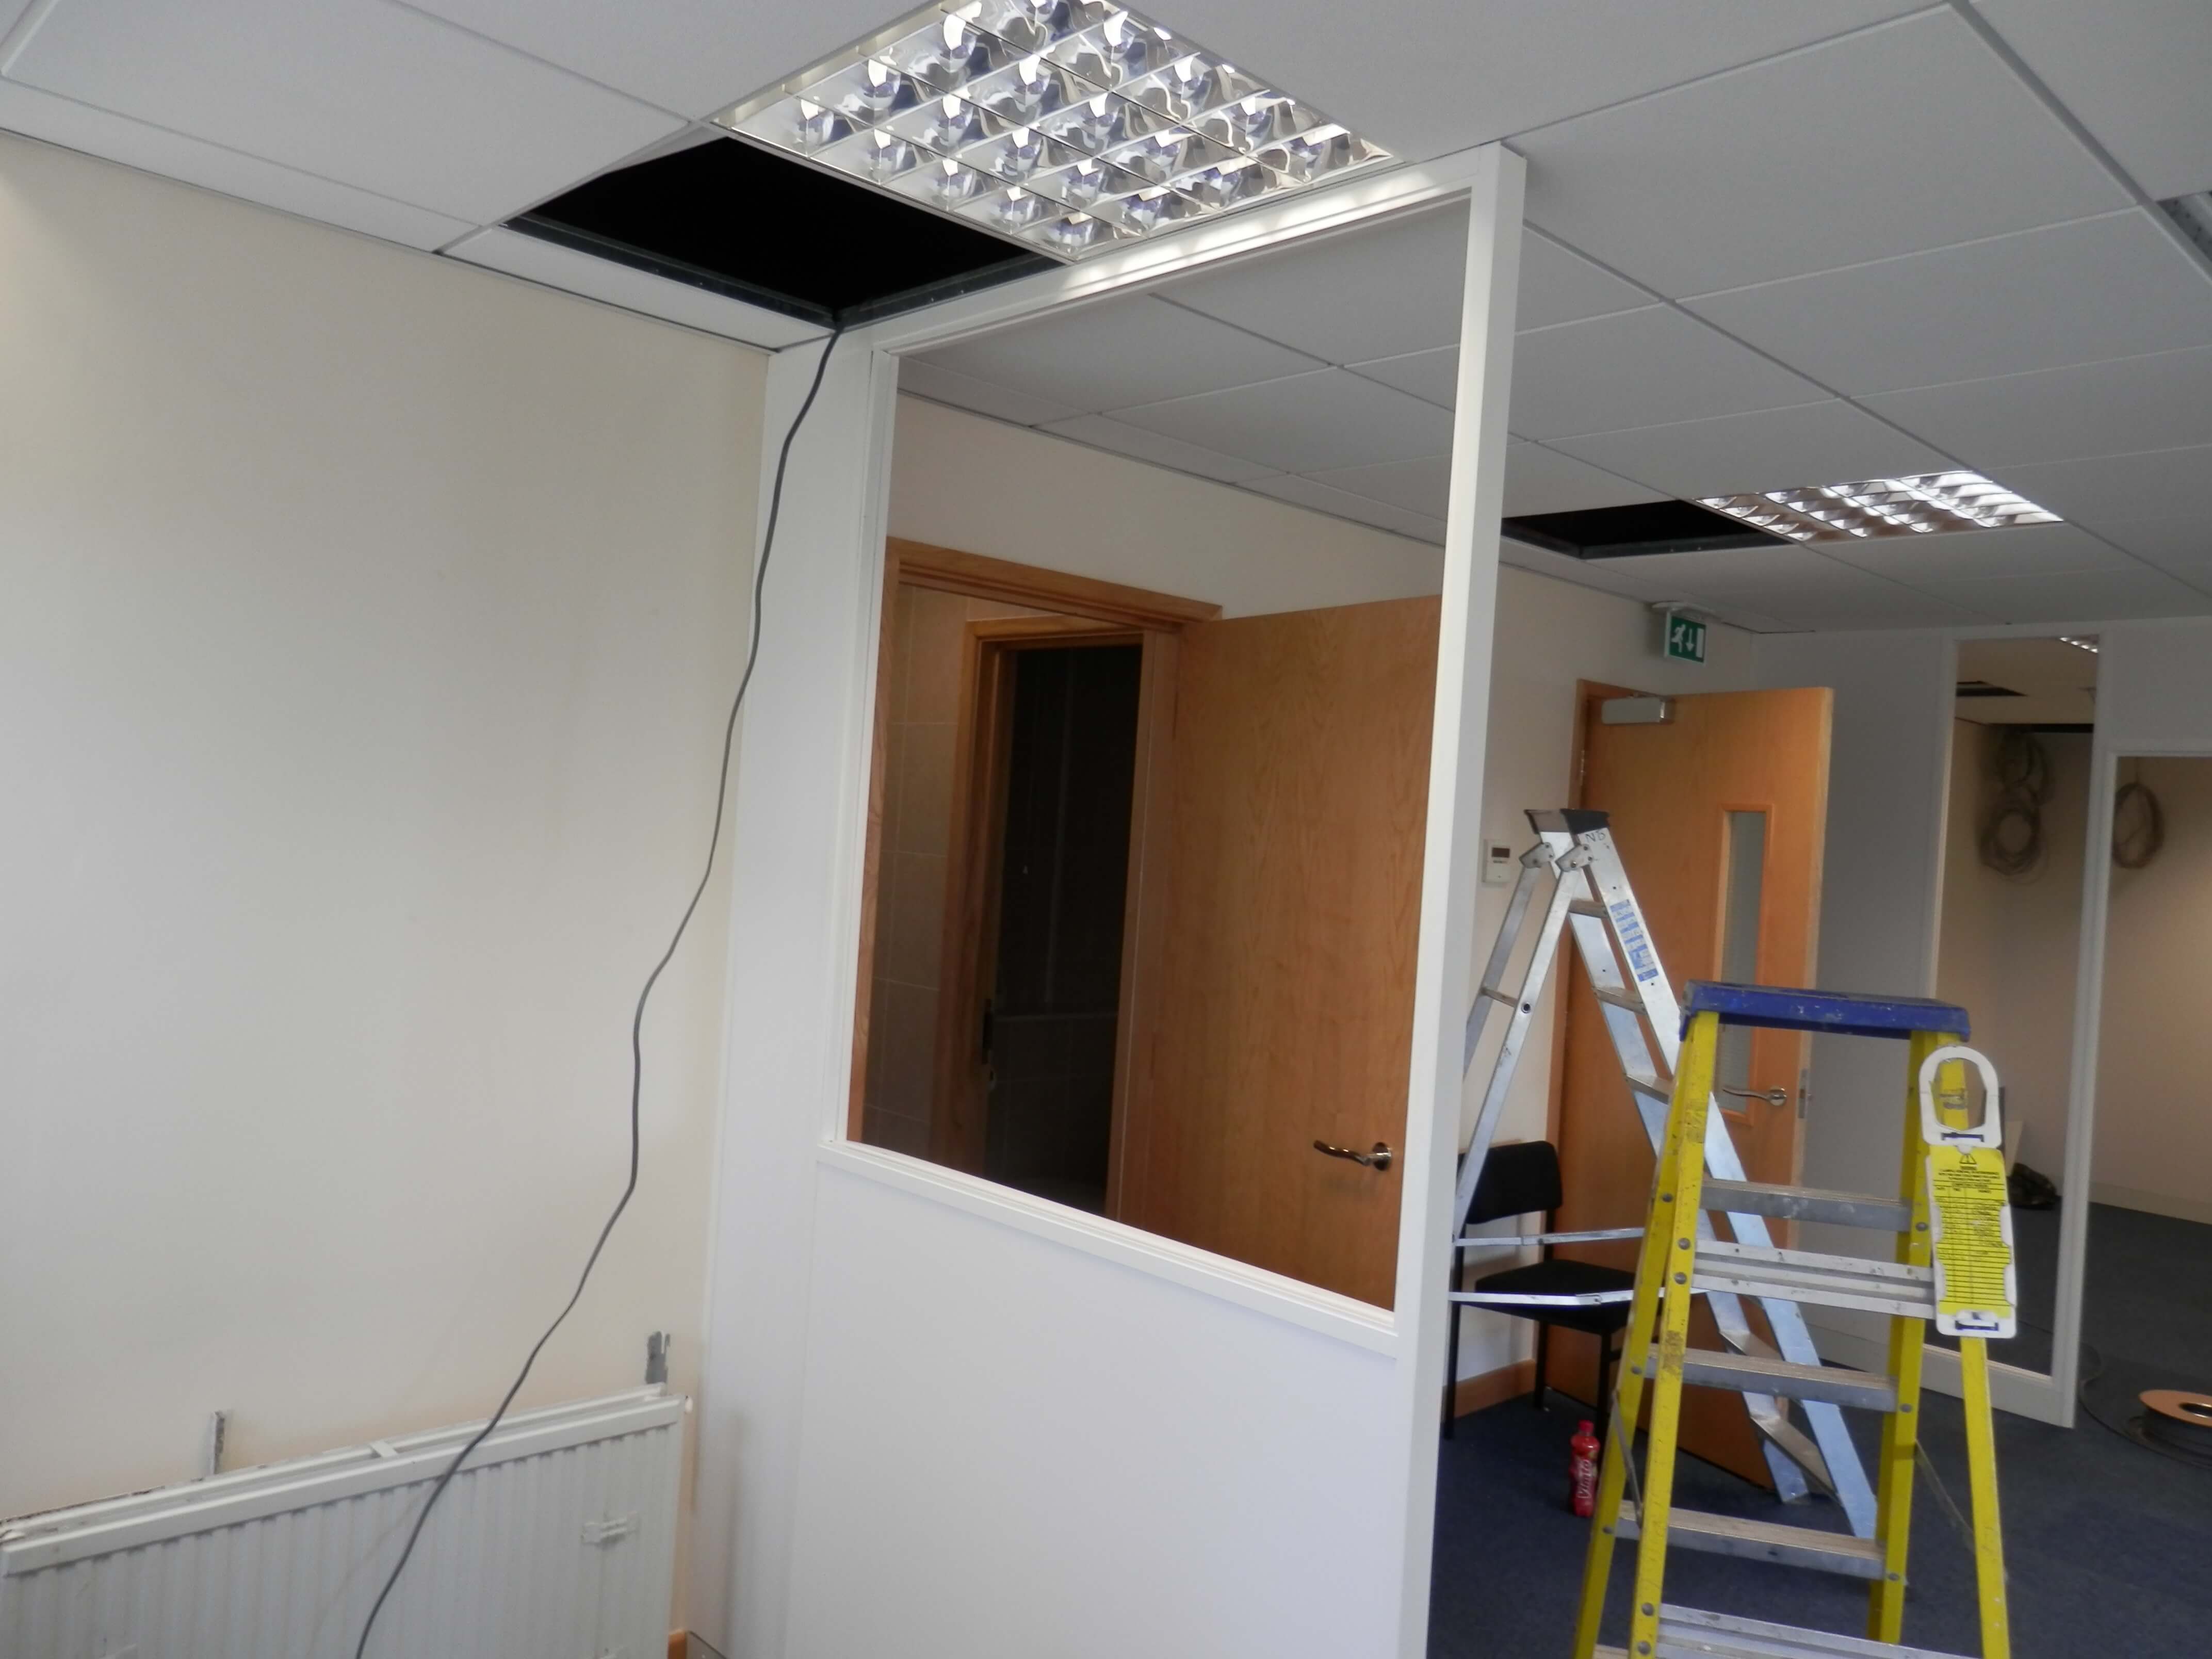 Demountable Partitioning in Calne